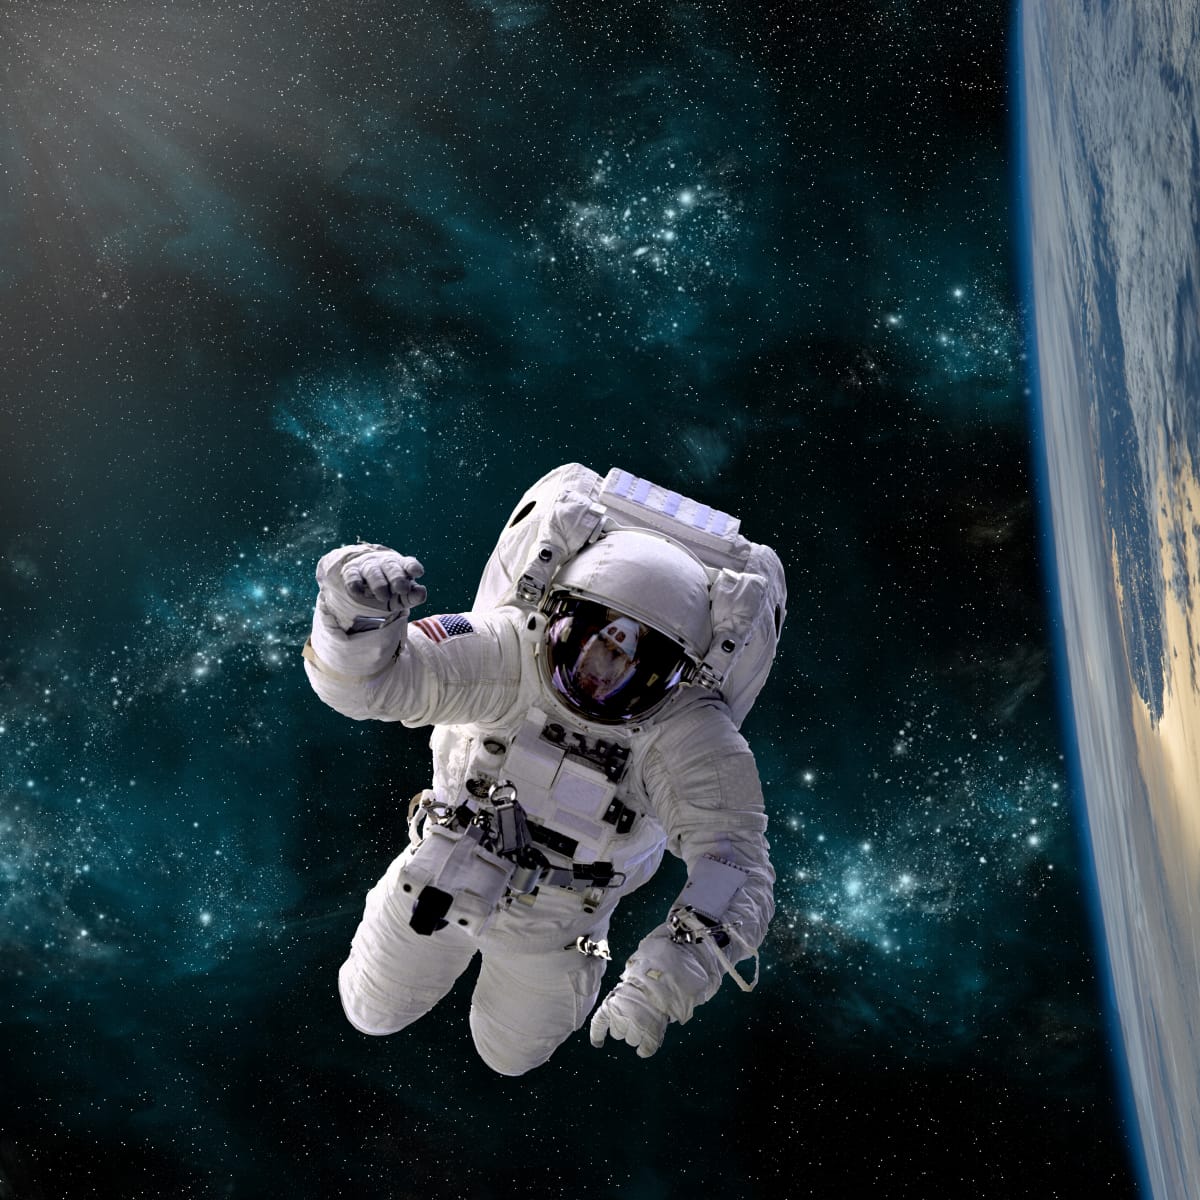 What happens to the unprotected human body in space? - CNET